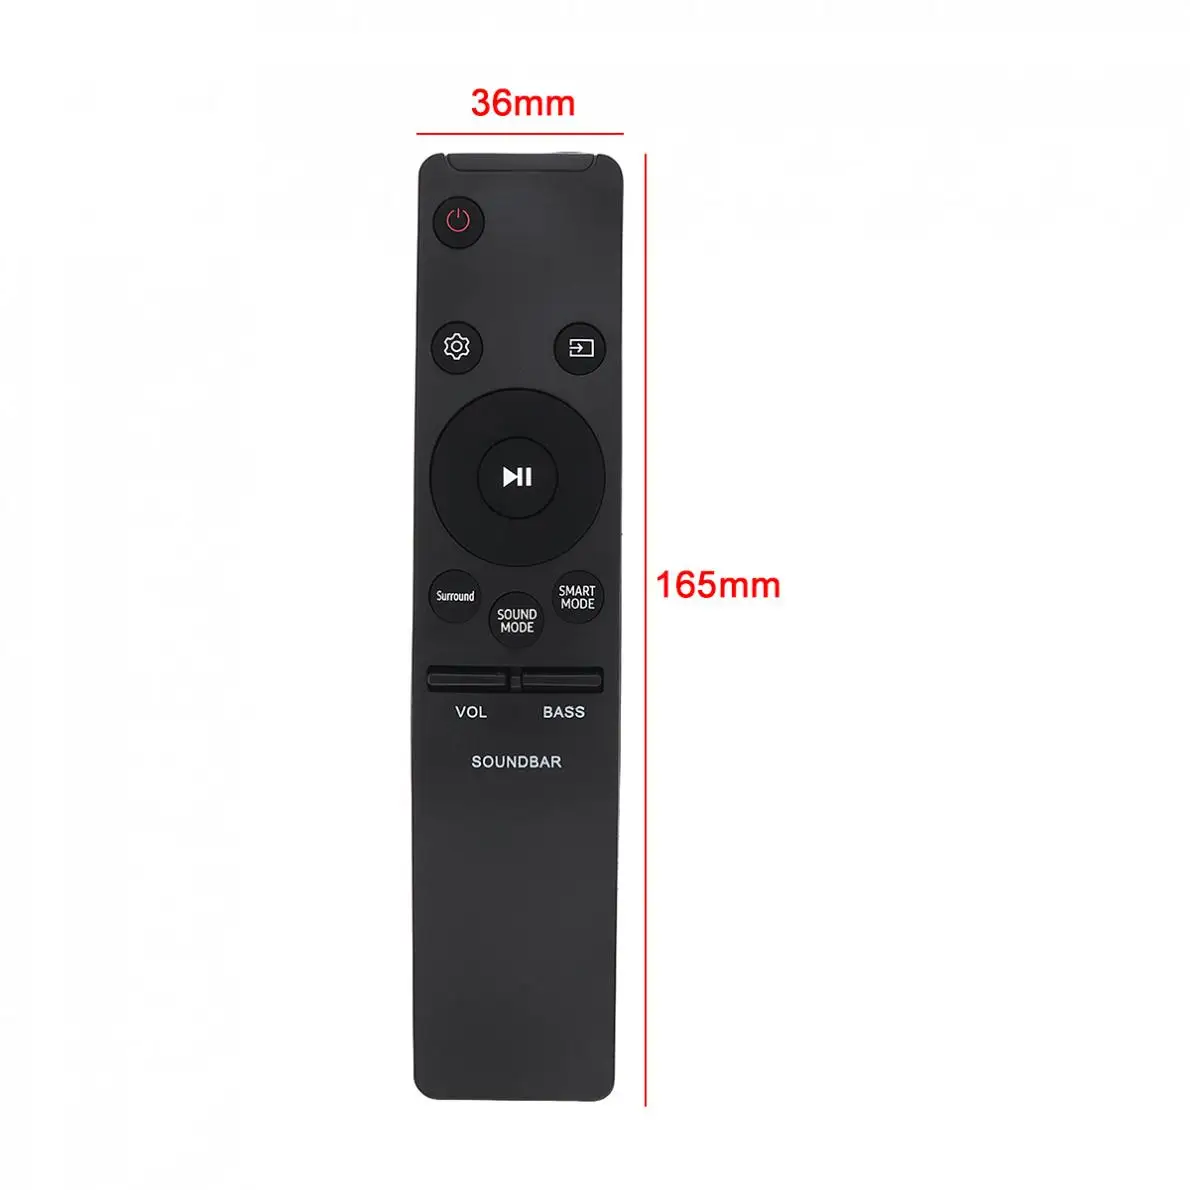 433 MHz IR TV Remote Control with USB and Voice Function Fit for Samsung TV 